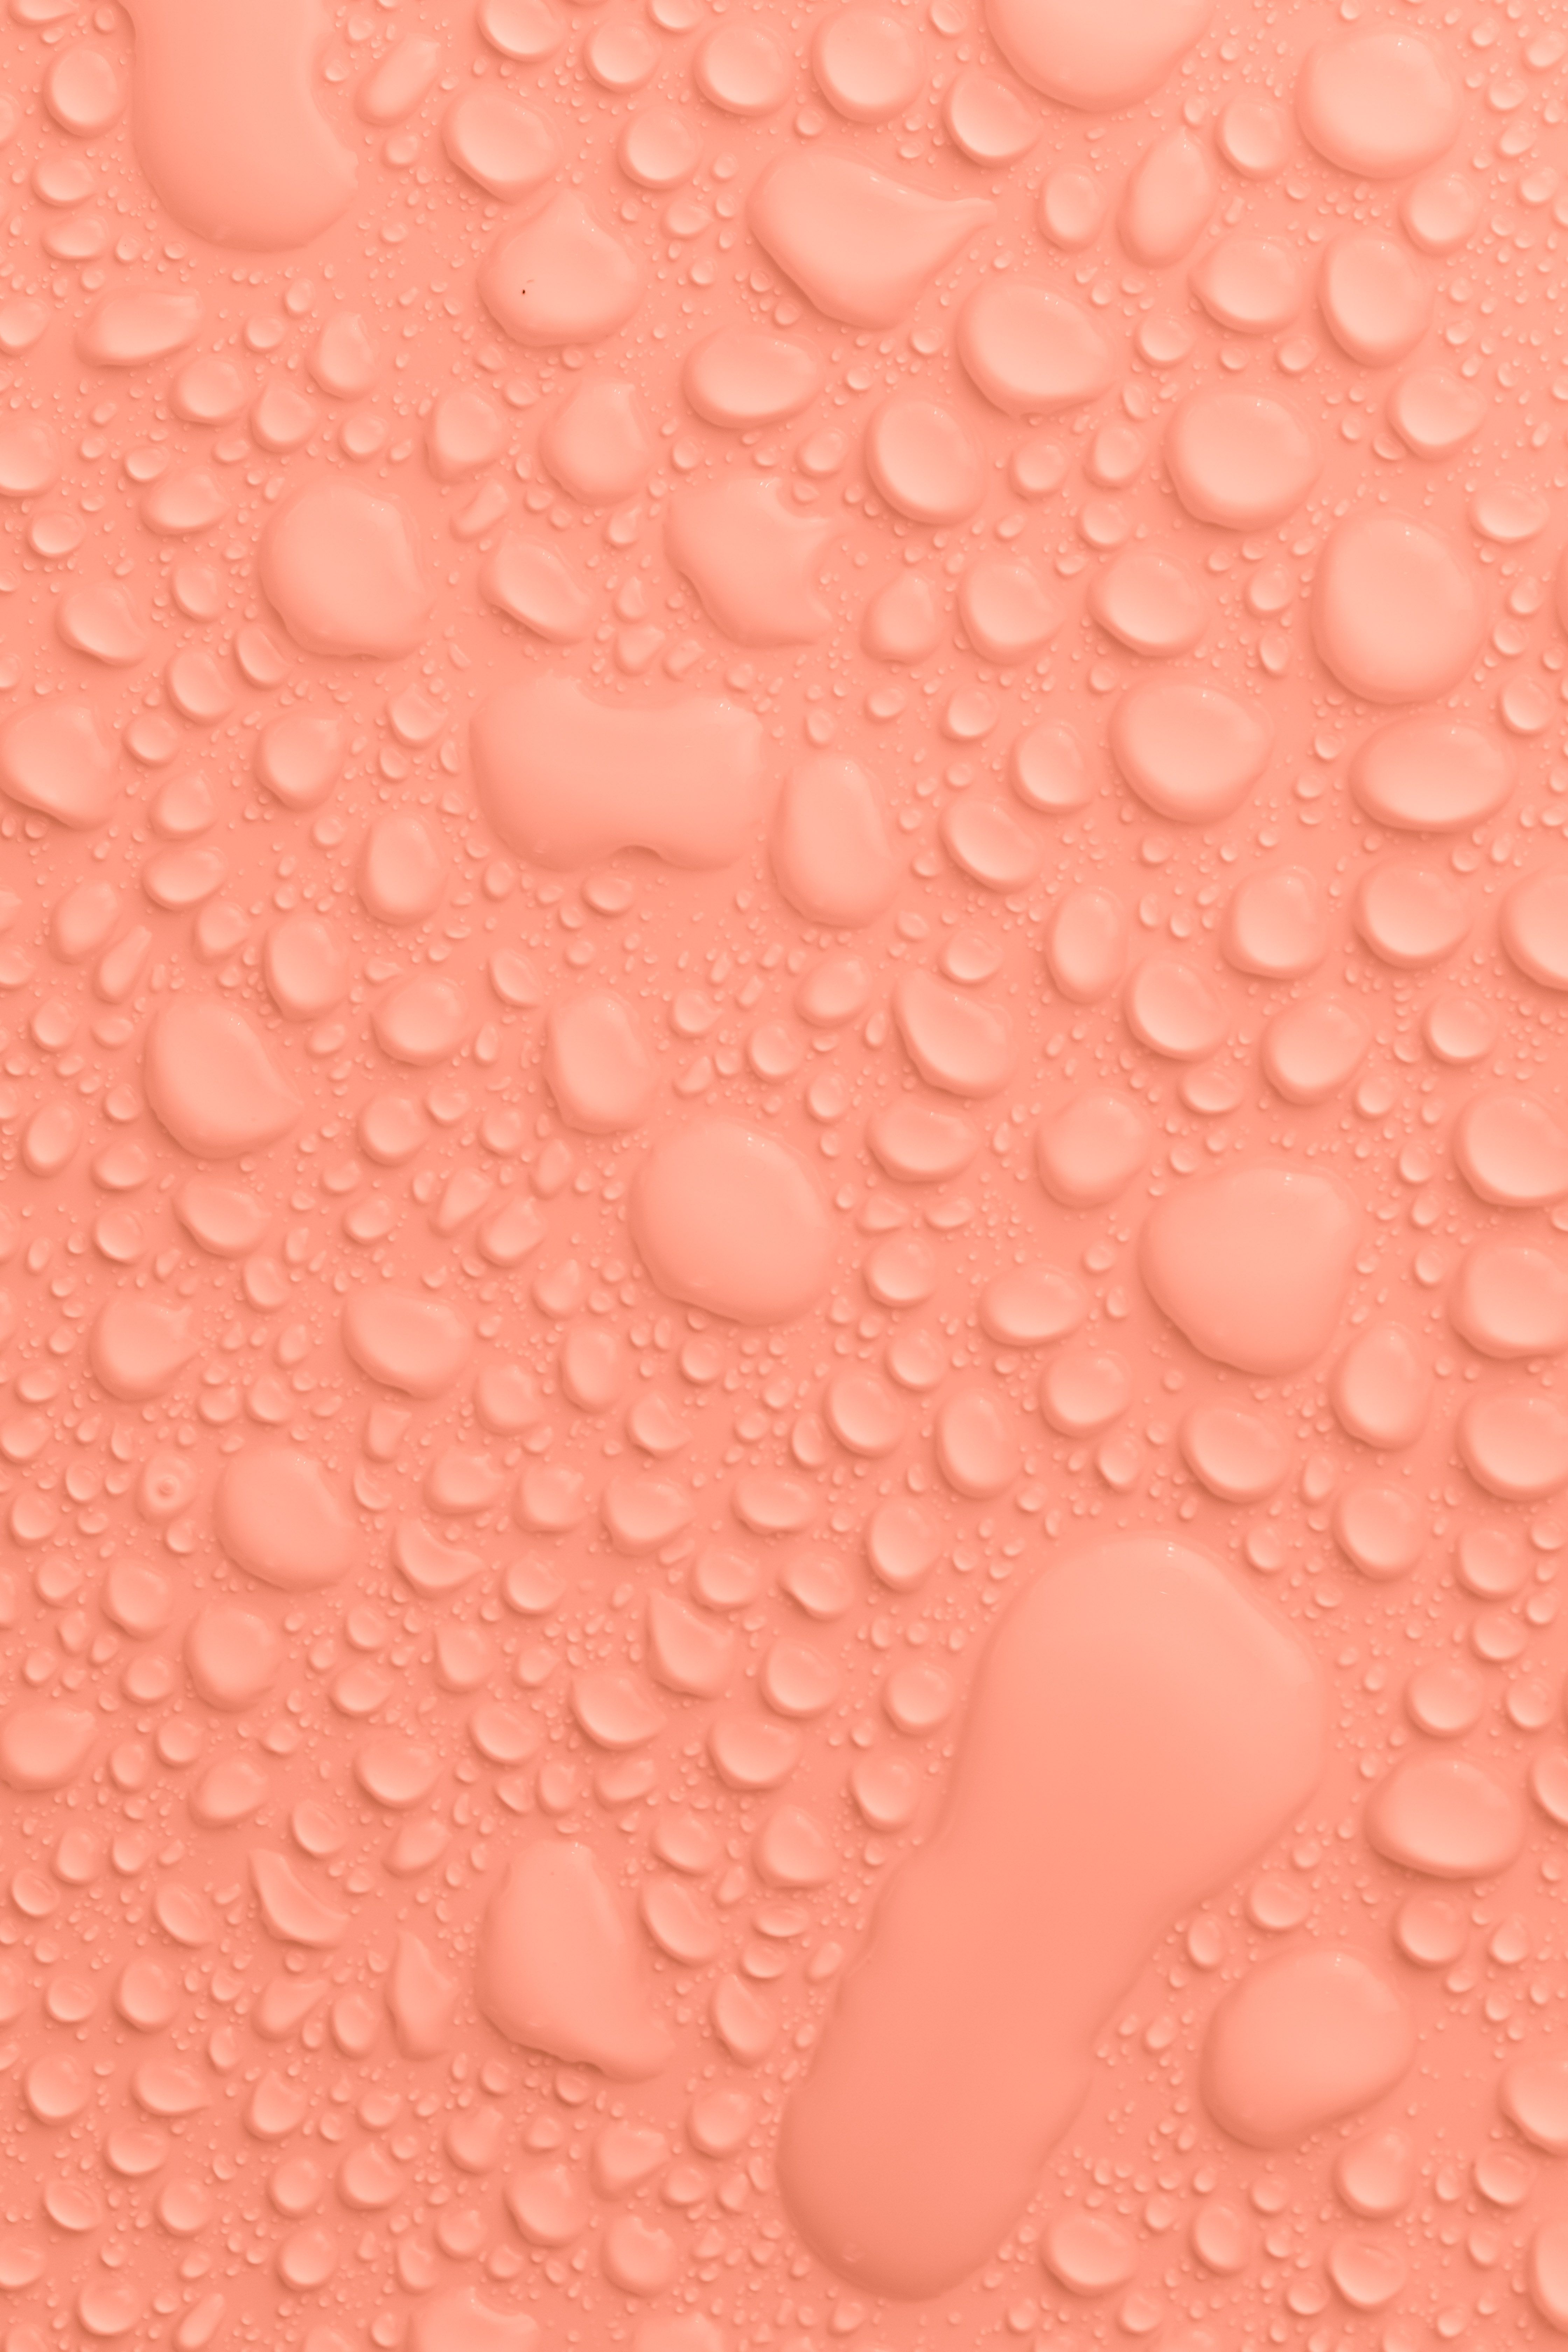 Peach colored background with water drops · Free